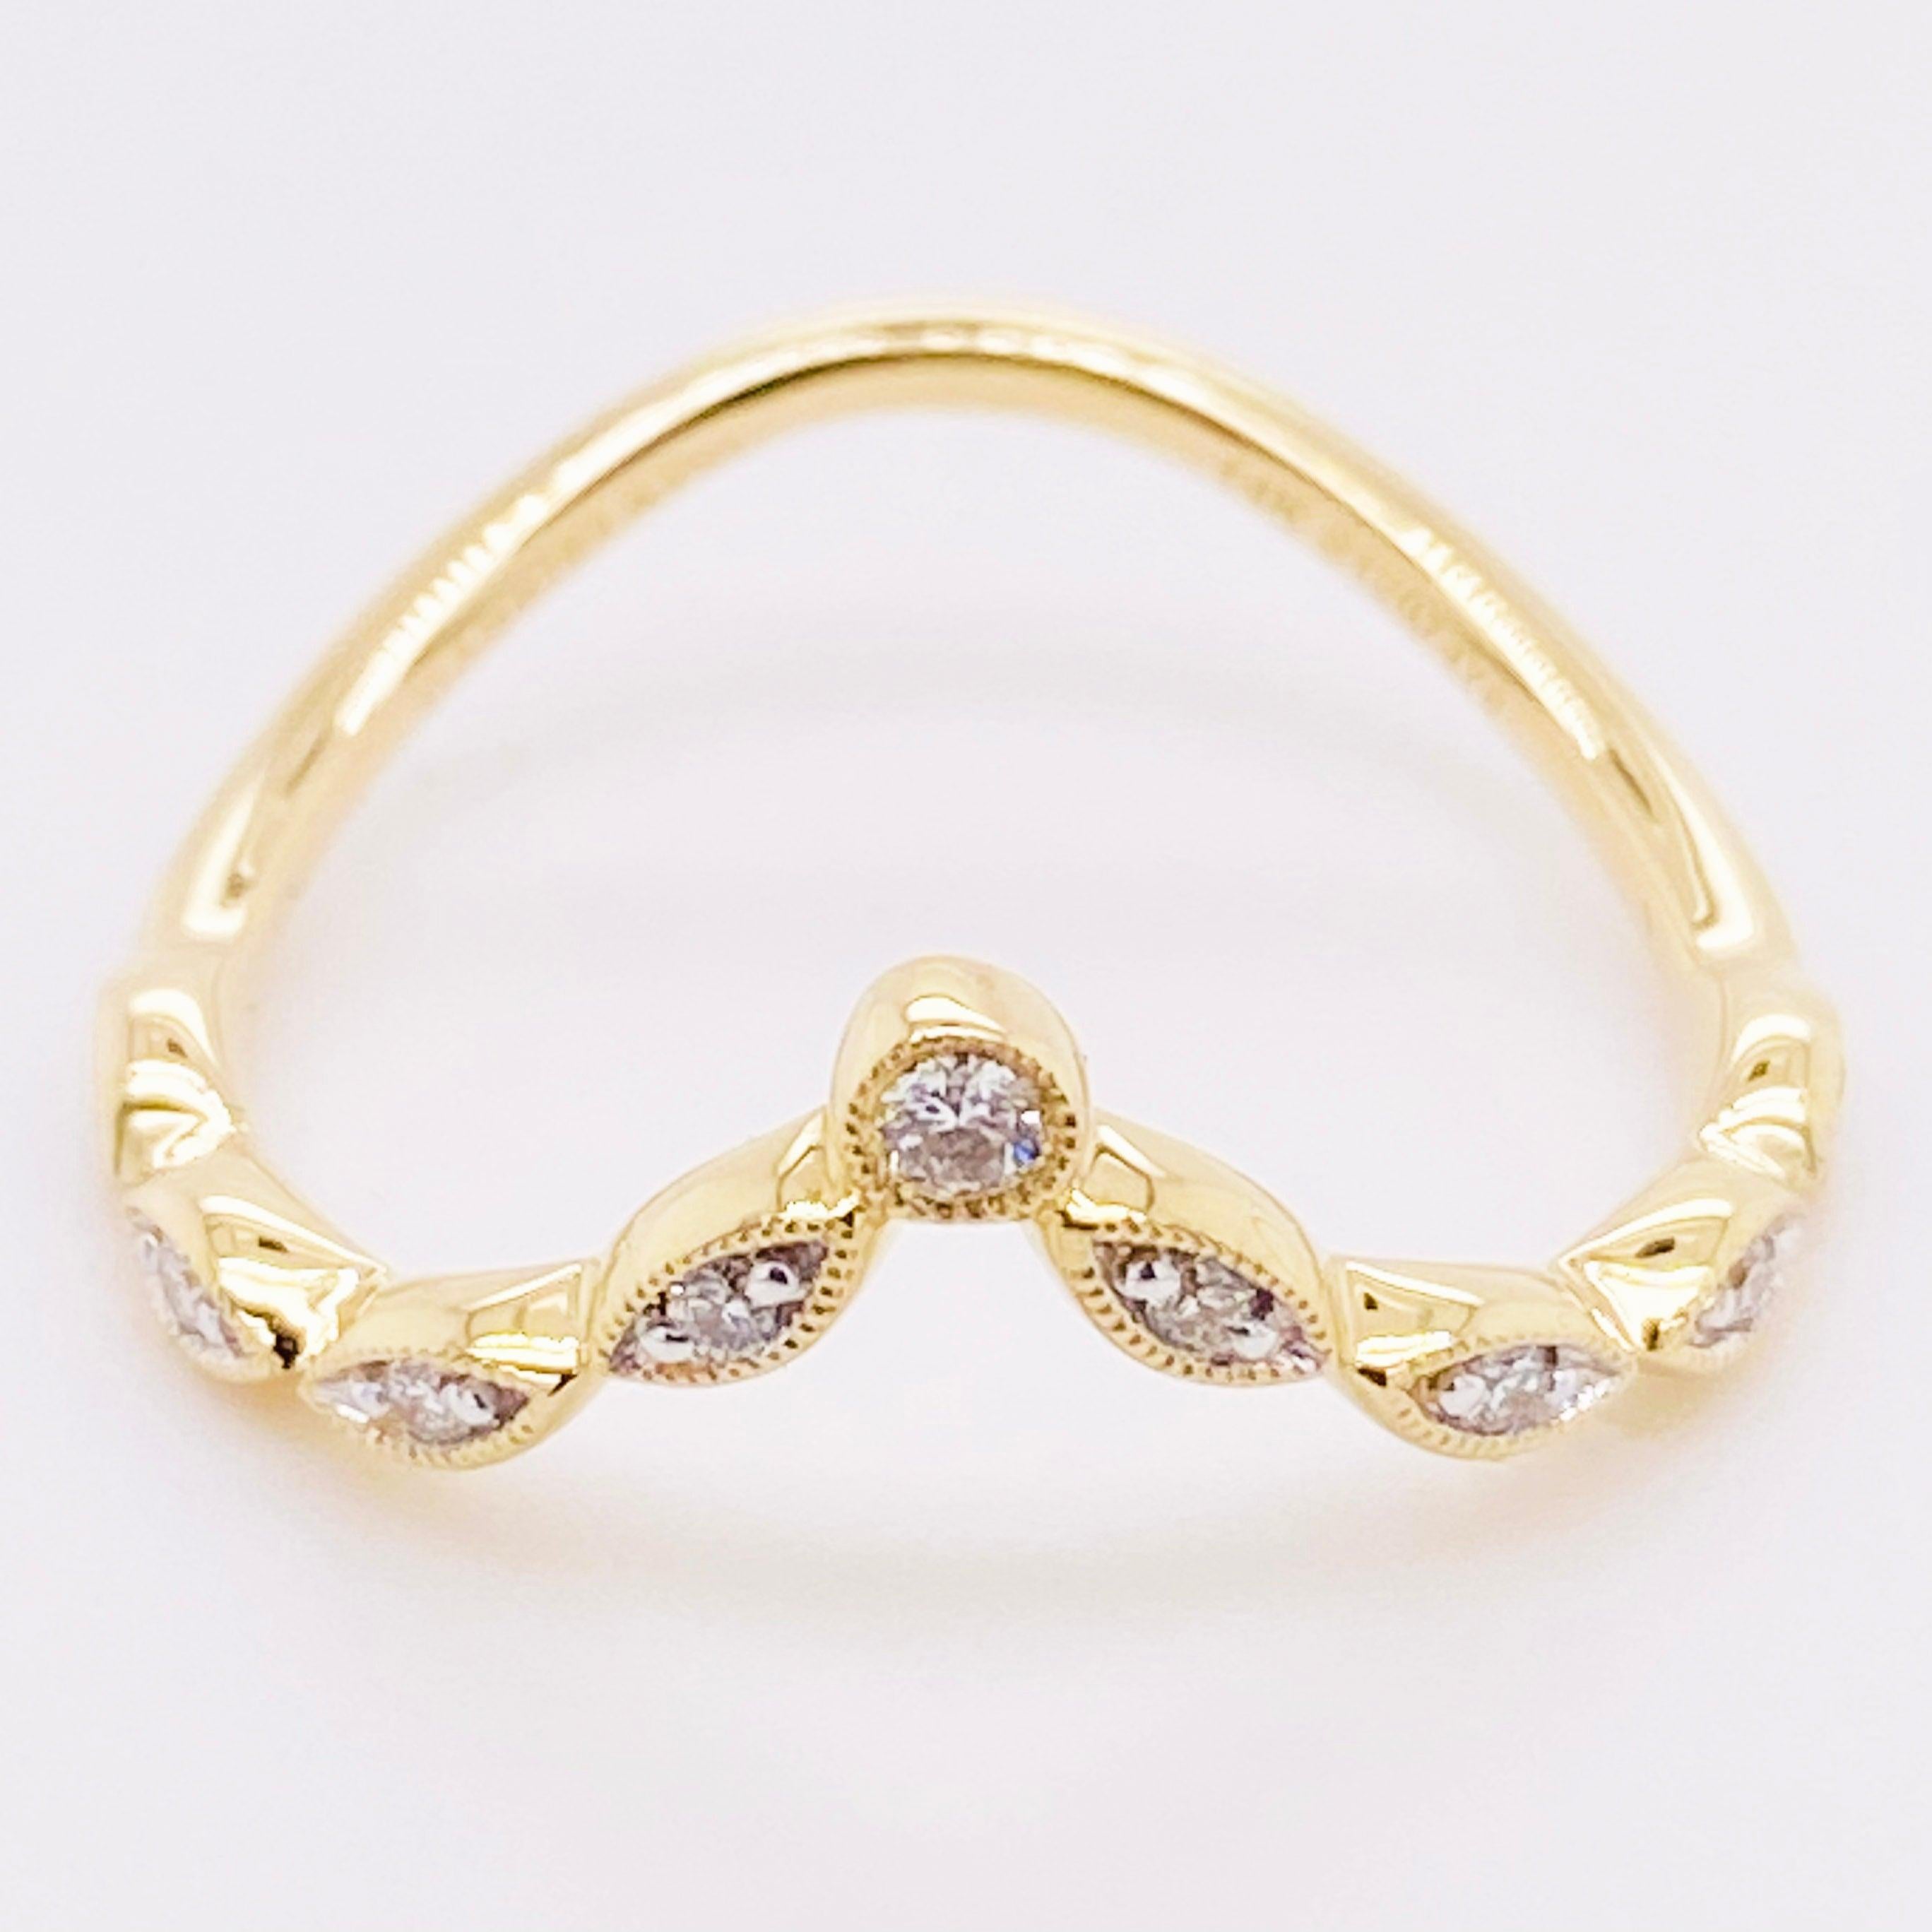 Diamond Curved Ring, 14 Karat Gold Curved Marquise Station Band, LR51842Y45JJ 3